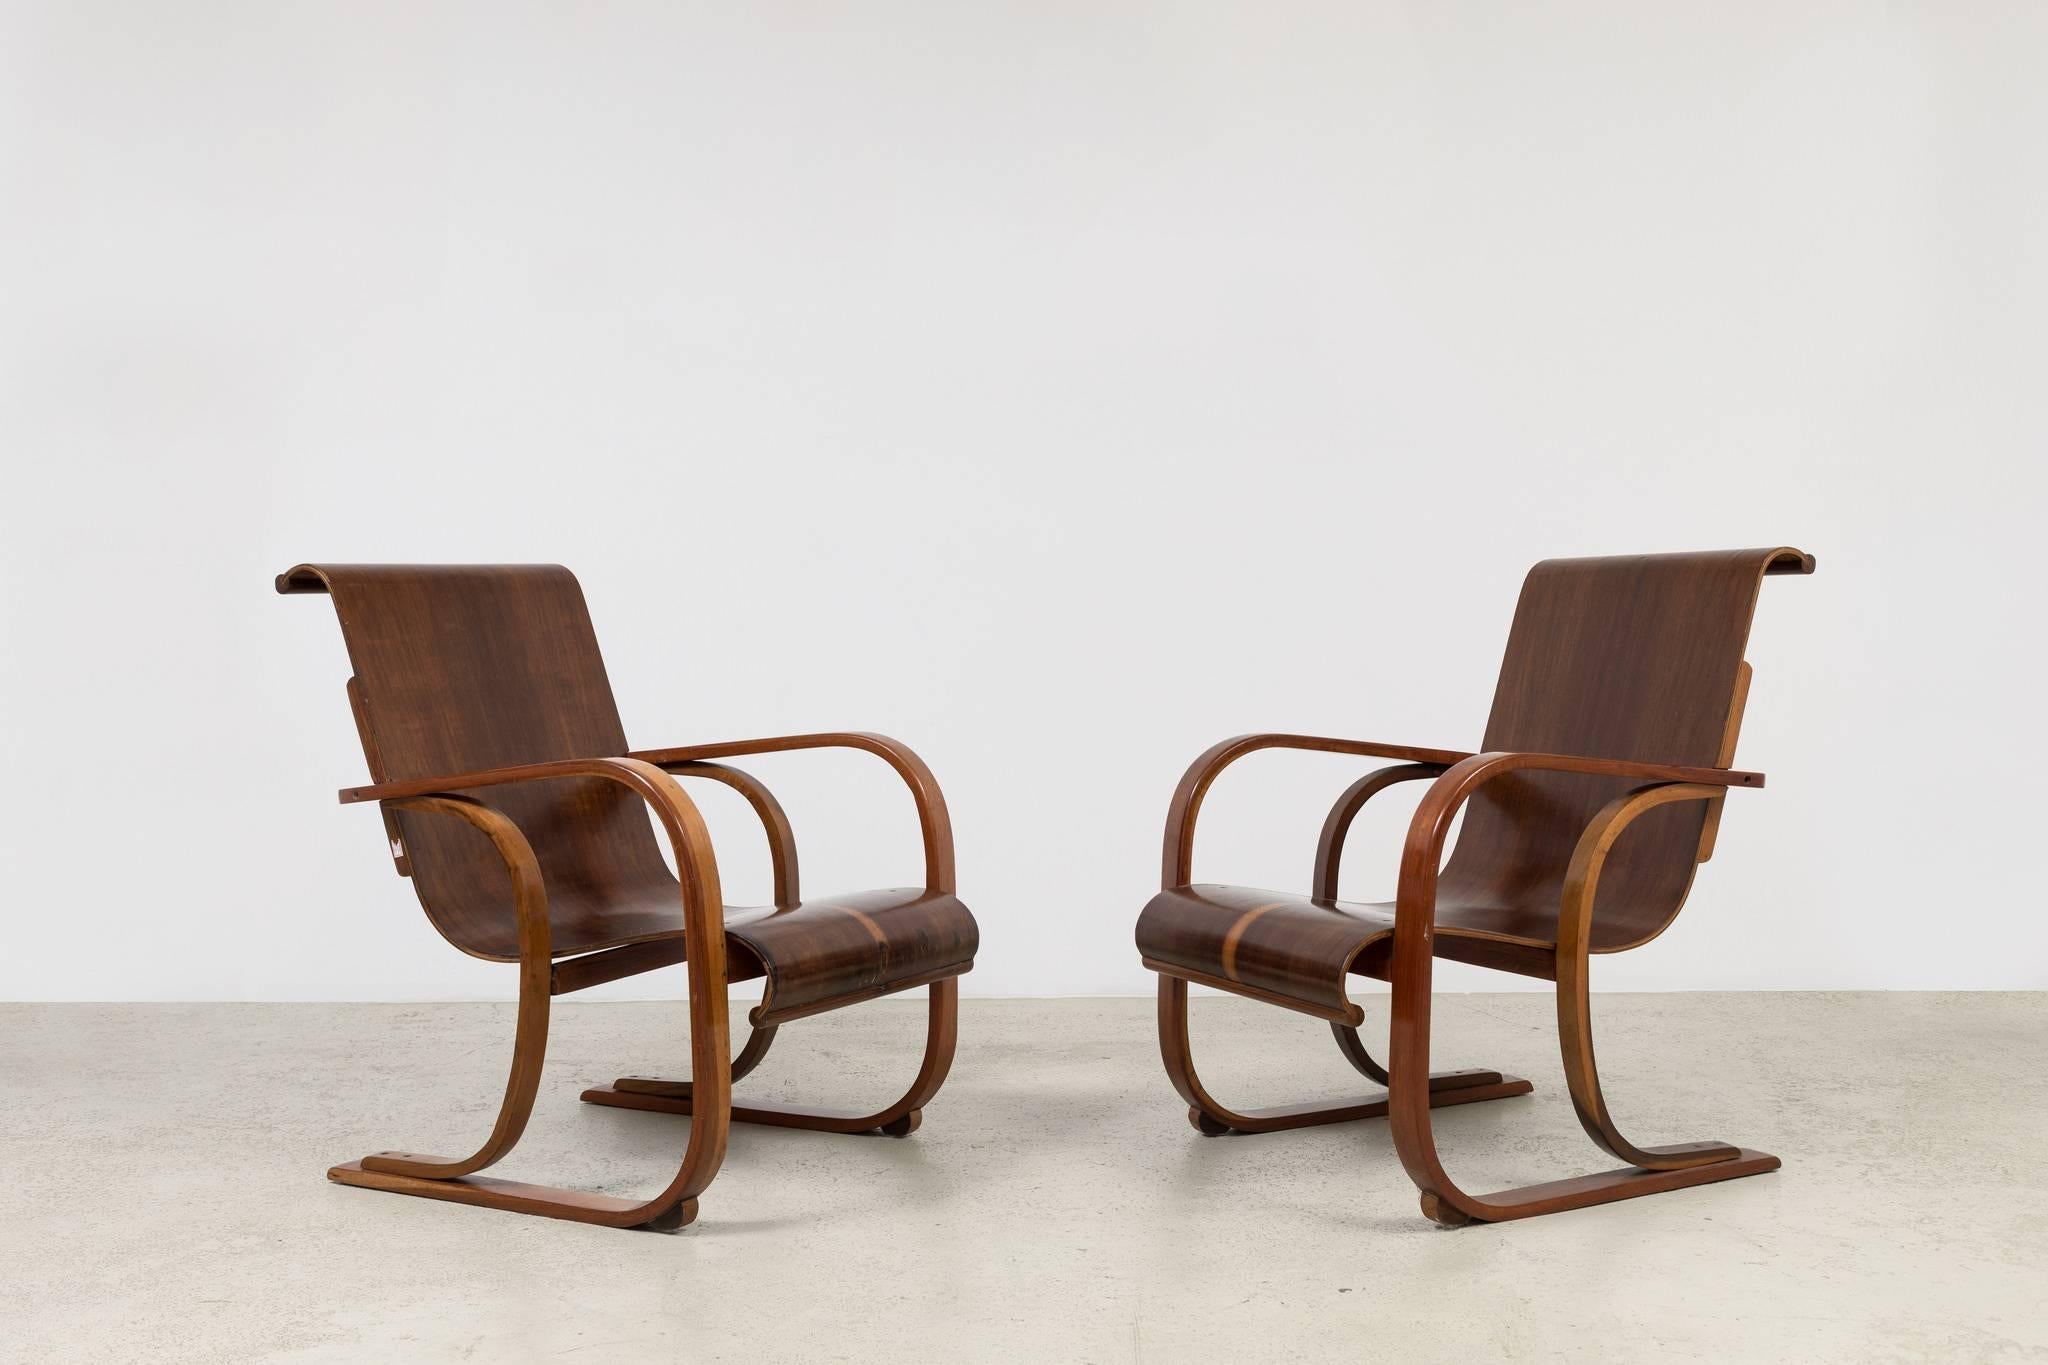 Vintage Art Deco 1950s armchairs made in curved plywood by Moveis CIMO. 

Moveis CIMO (Cia. Industrial de Móveis S/A) was a Brazilian furniture factory established in 1913 in Santa Catarina. The company – which was once the largest furniture